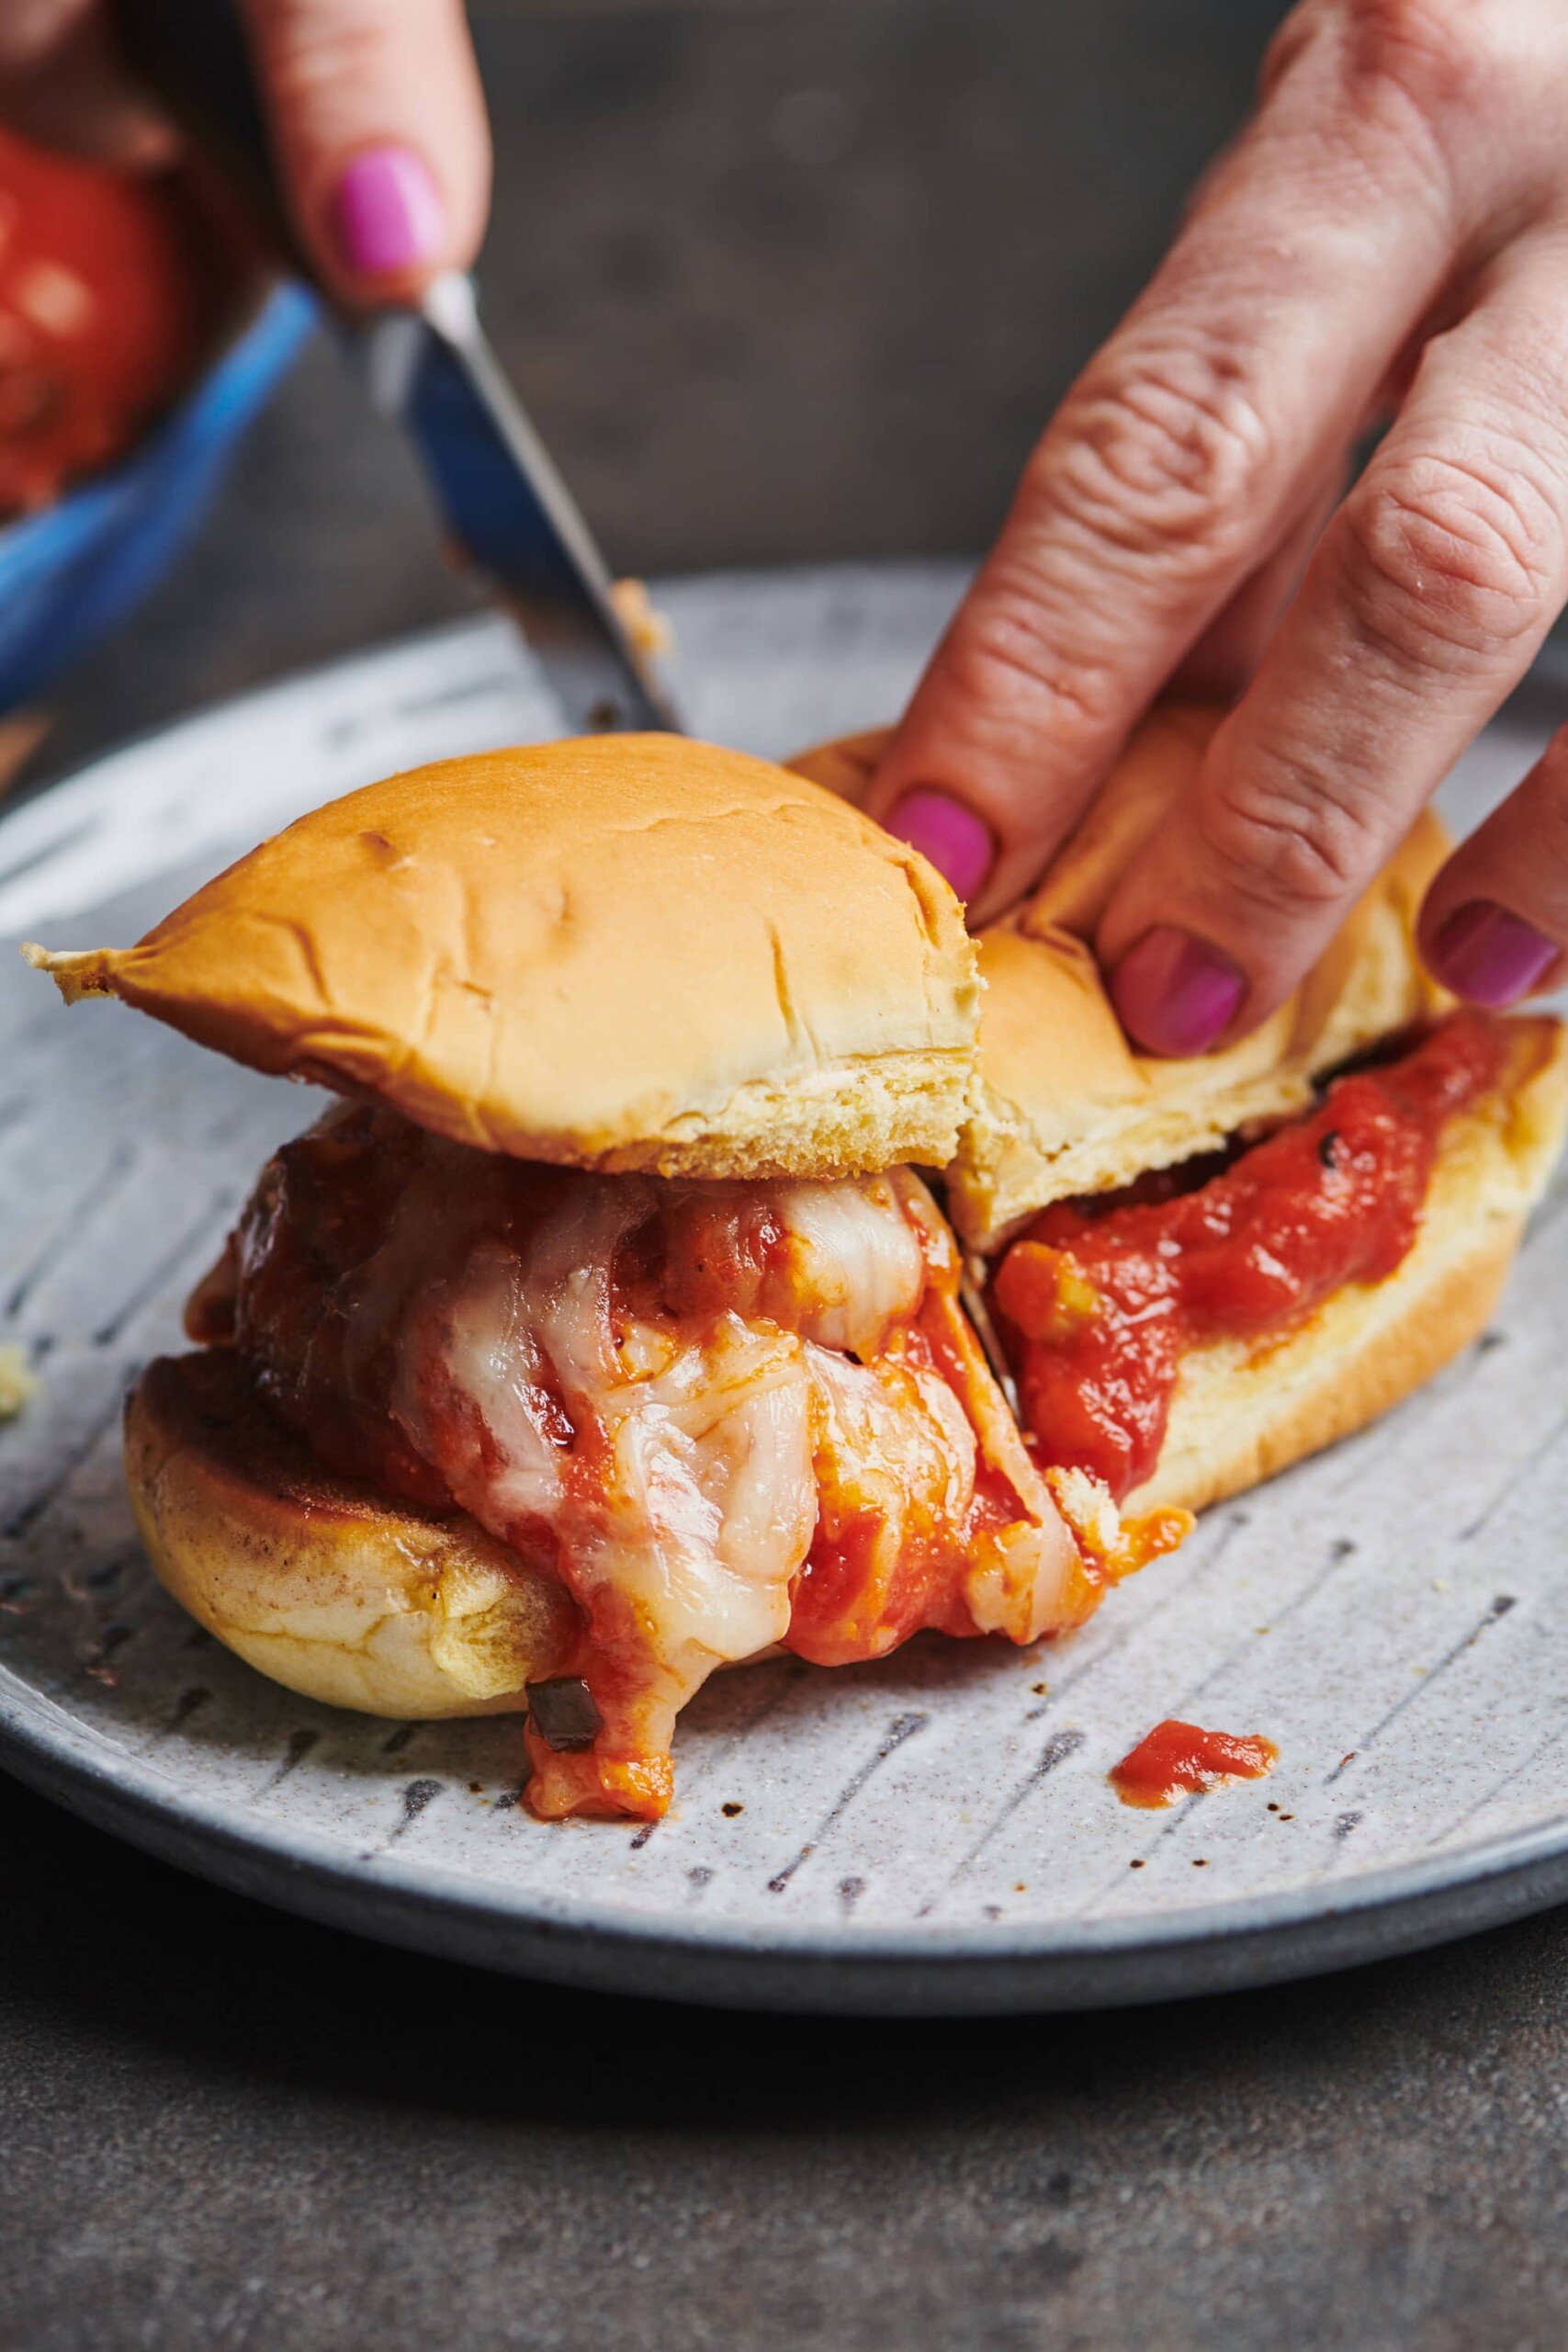 Woman cutting a Meatball Sub with a knife.